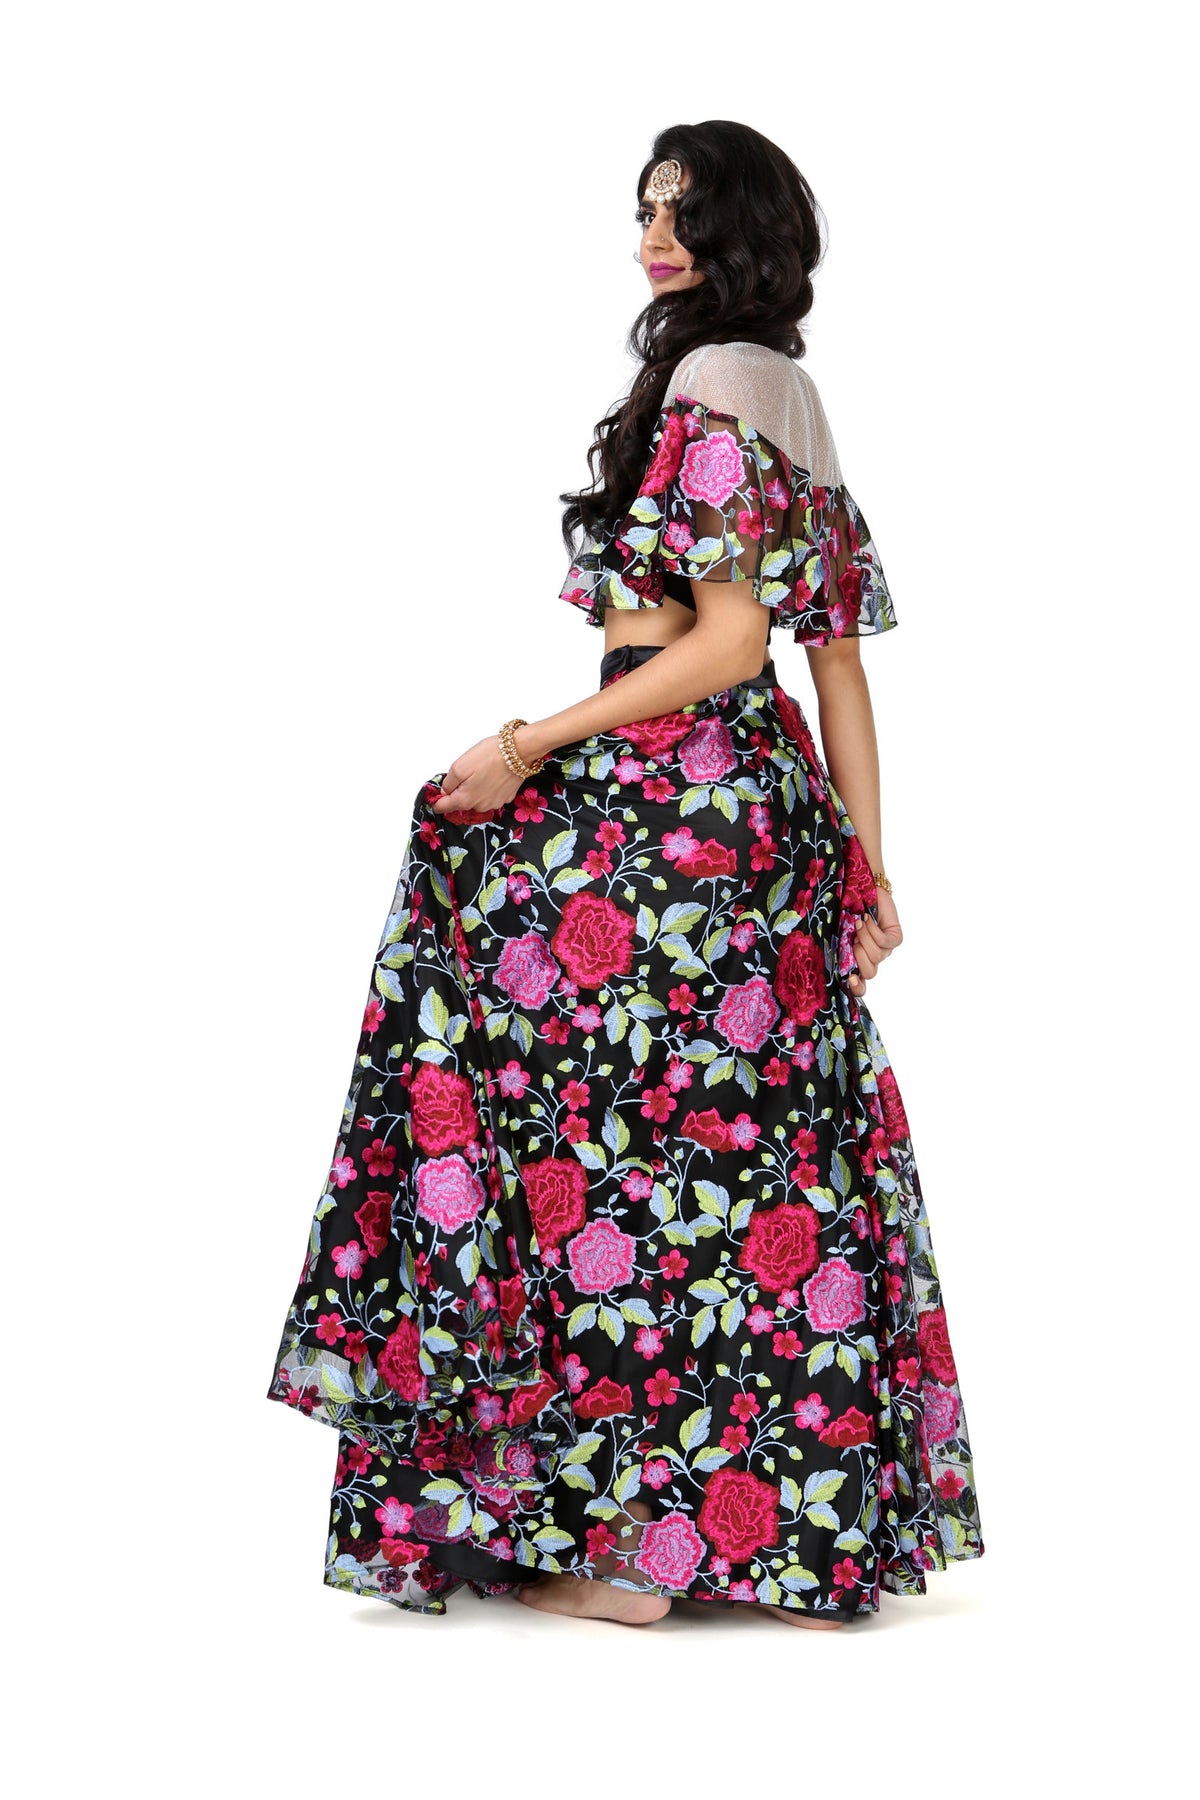 Black and Pink Embroidered Floral Floor Length Lehenga Skirt - Front View - Harleen Kaur - Indian Womenswear